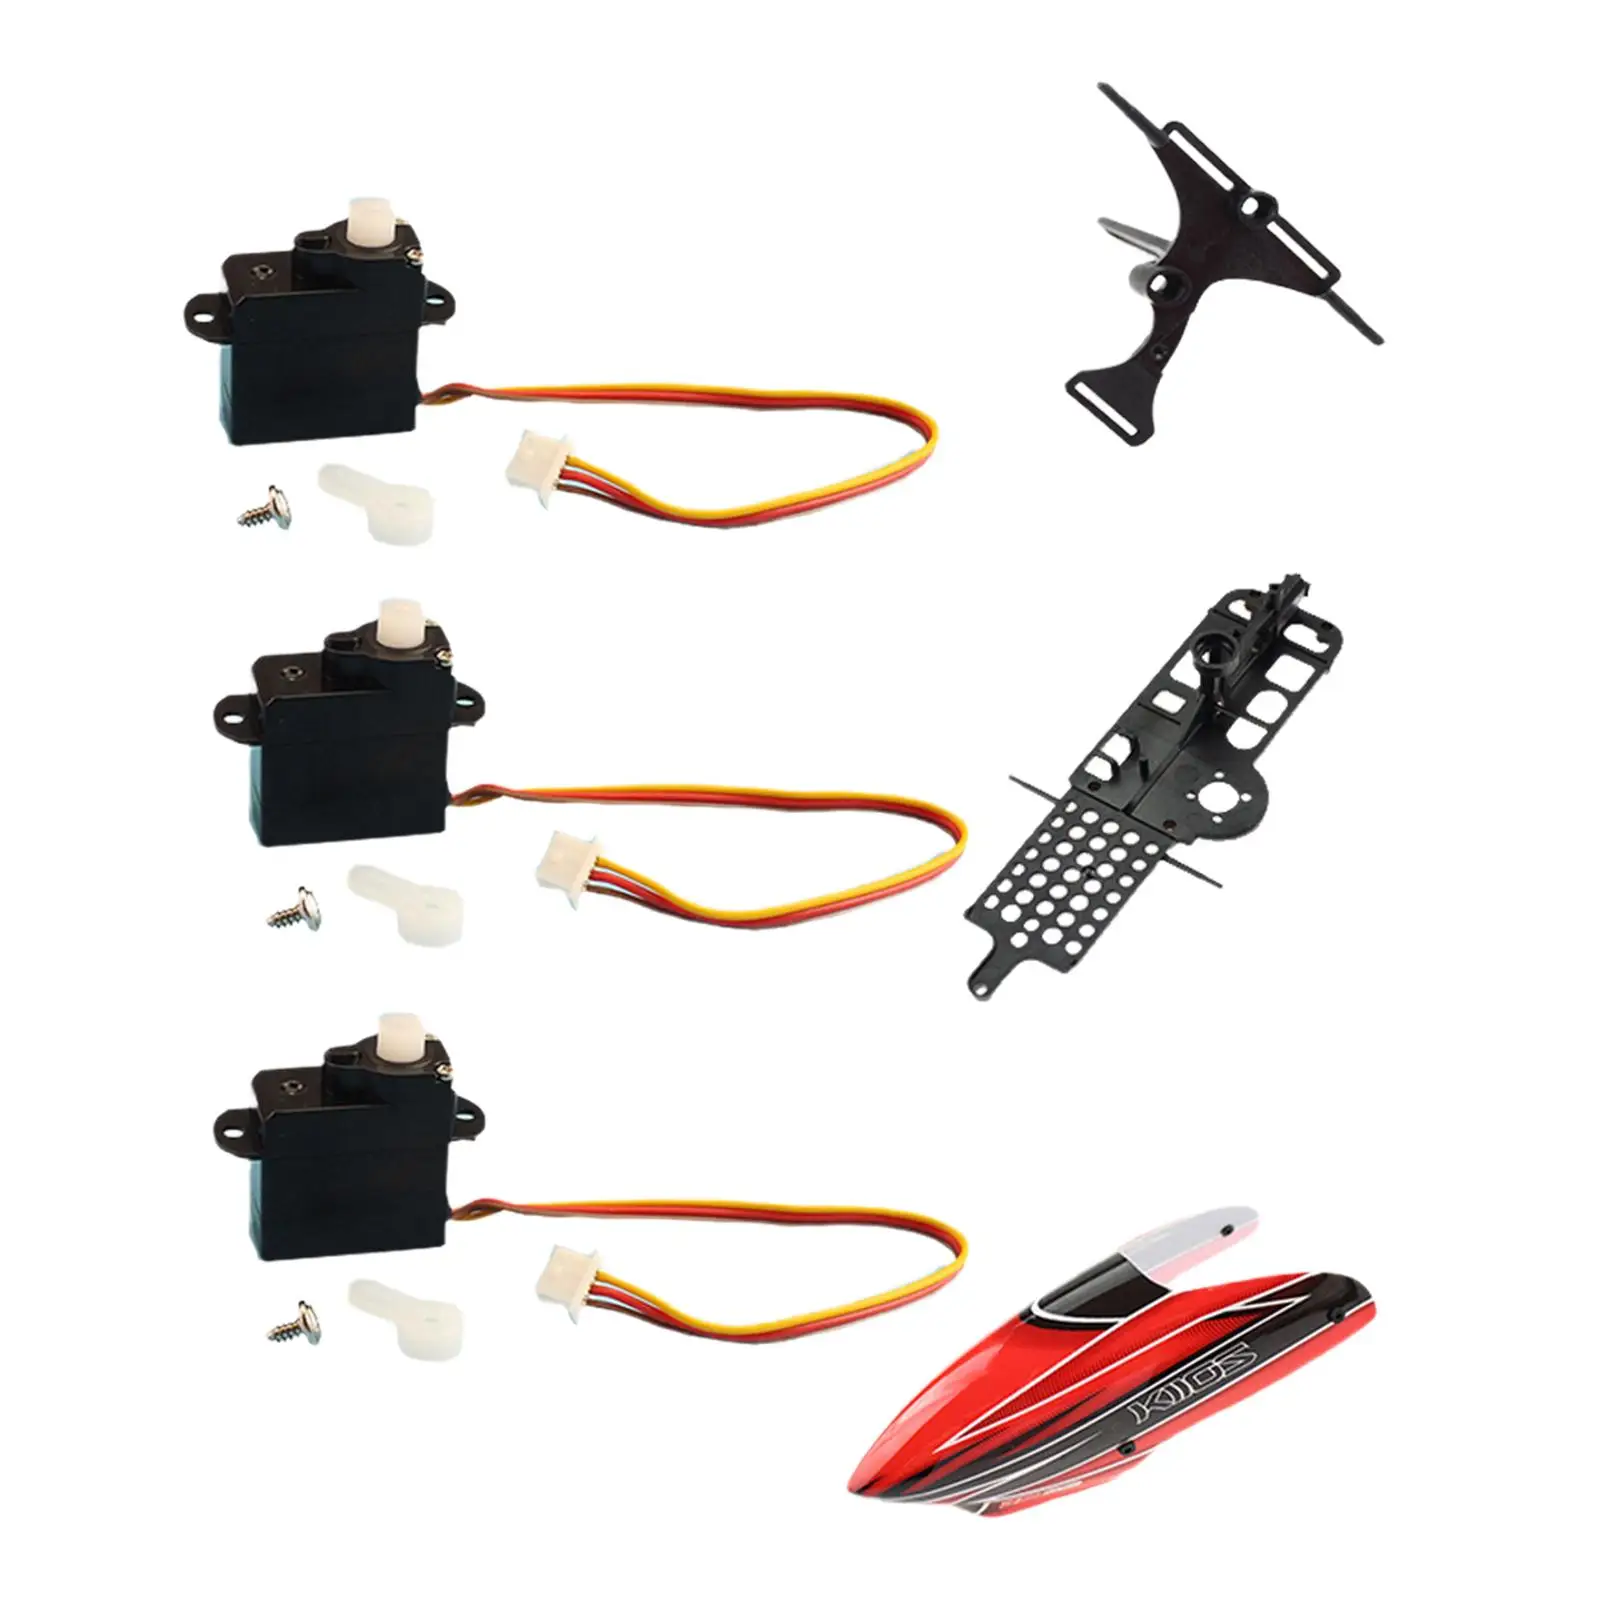 Helicopter Digital RC Servo Remote Control Toys for XK K110 DIY Accessory